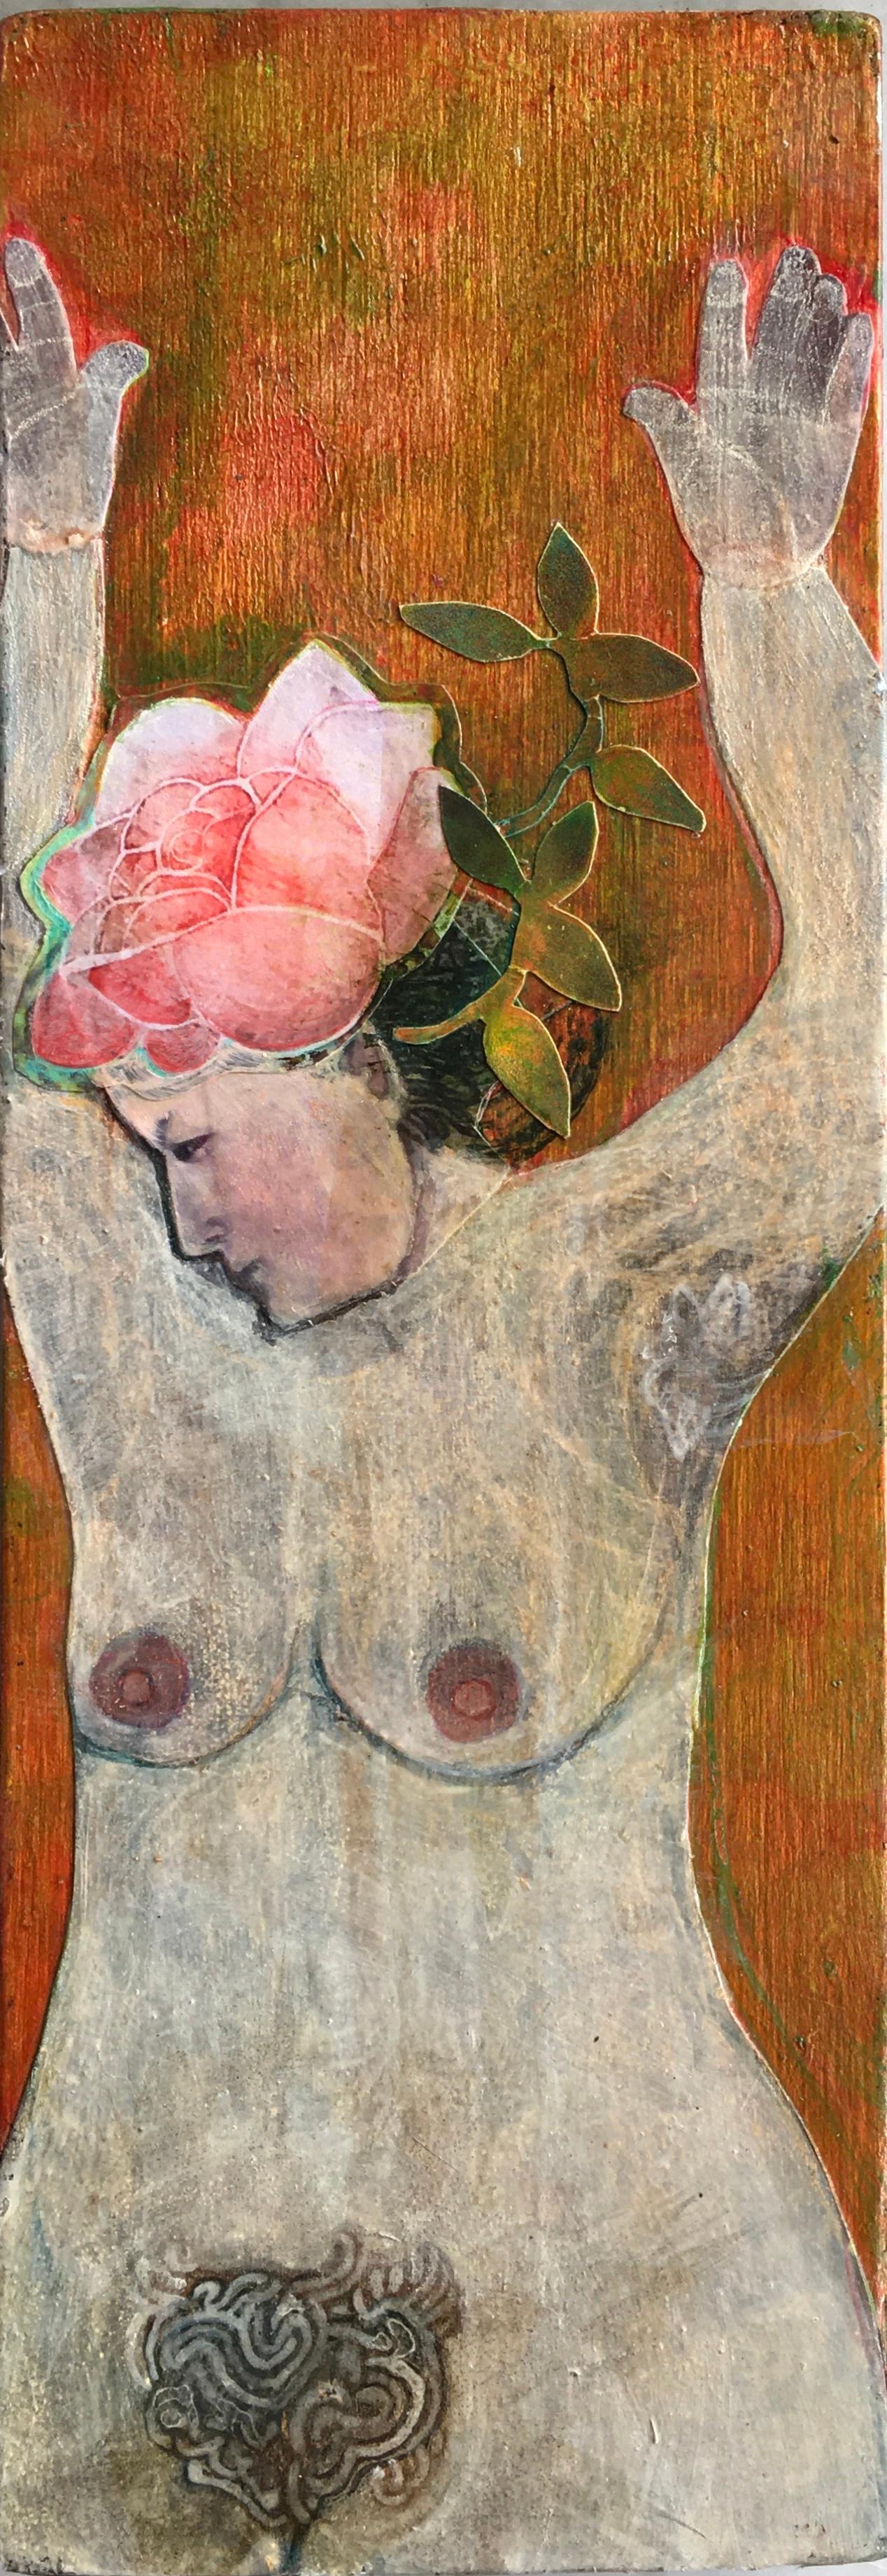 Rose, portrait of nude woman with floral headpiece, mixed media on panel